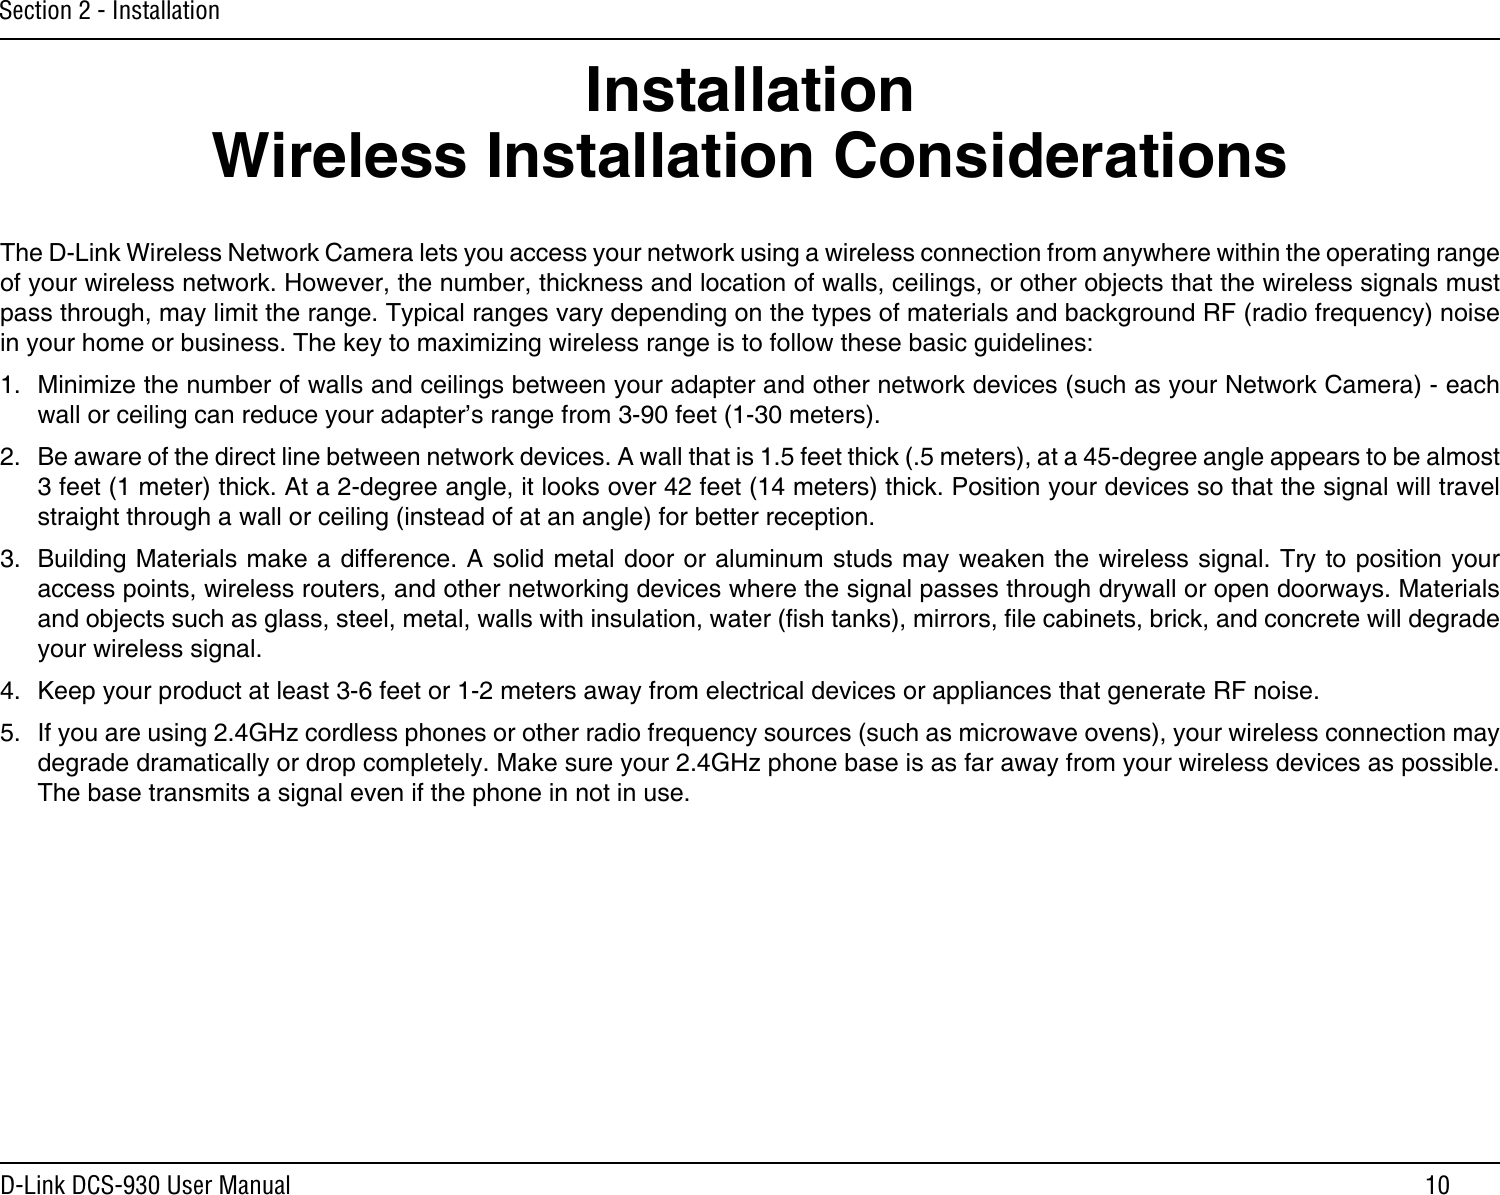 10D-Link DCS-930 User ManualSection 2 - InstallationWireless Installation ConsiderationsThe D-Link Wireless Network Camera lets you access your network using a wireless connection from anywhere within the operating range of your wireless network. However, the number, thickness and location of walls, ceilings, or other objects that the wireless signals must pass through, may limit the range. Typical ranges vary depending on the types of materials and background RF (radio frequency) noise in your home or business. The key to maximizing wireless range is to follow these basic guidelines:1.  Minimize the number of walls and ceilings between your adapter and other network devices (such as your Network Camera) - each wall or ceiling can reduce your adapter’s range from 3-90 feet (1-30 meters).2.  Be aware of the direct line between network devices. A wall that is 1.5 feet thick (.5 meters), at a 45-degree angle appears to be almost 3 feet (1 meter) thick. At a 2-degree angle, it looks over 42 feet (14 meters) thick. Position your devices so that the signal will travel straight through a wall or ceiling (instead of at an angle) for better reception.3.  Building Materials make a difference. A solid metal door or aluminum studs may weaken the wireless signal. Try to position your access points, wireless routers, and other networking devices where the signal passes through drywall or open doorways. Materials and objects such as glass, steel, metal, walls with insulation, water (sh tanks), mirrors, le cabinets, brick, and concrete will degrade your wireless signal.4.  Keep your product at least 3-6 feet or 1-2 meters away from electrical devices or appliances that generate RF noise.5.  If you are using 2.4GHz cordless phones or other radio frequency sources (such as microwave ovens), your wireless connection may degrade dramatically or drop completely. Make sure your 2.4GHz phone base is as far away from your wireless devices as possible. The base transmits a signal even if the phone in not in use.Installation